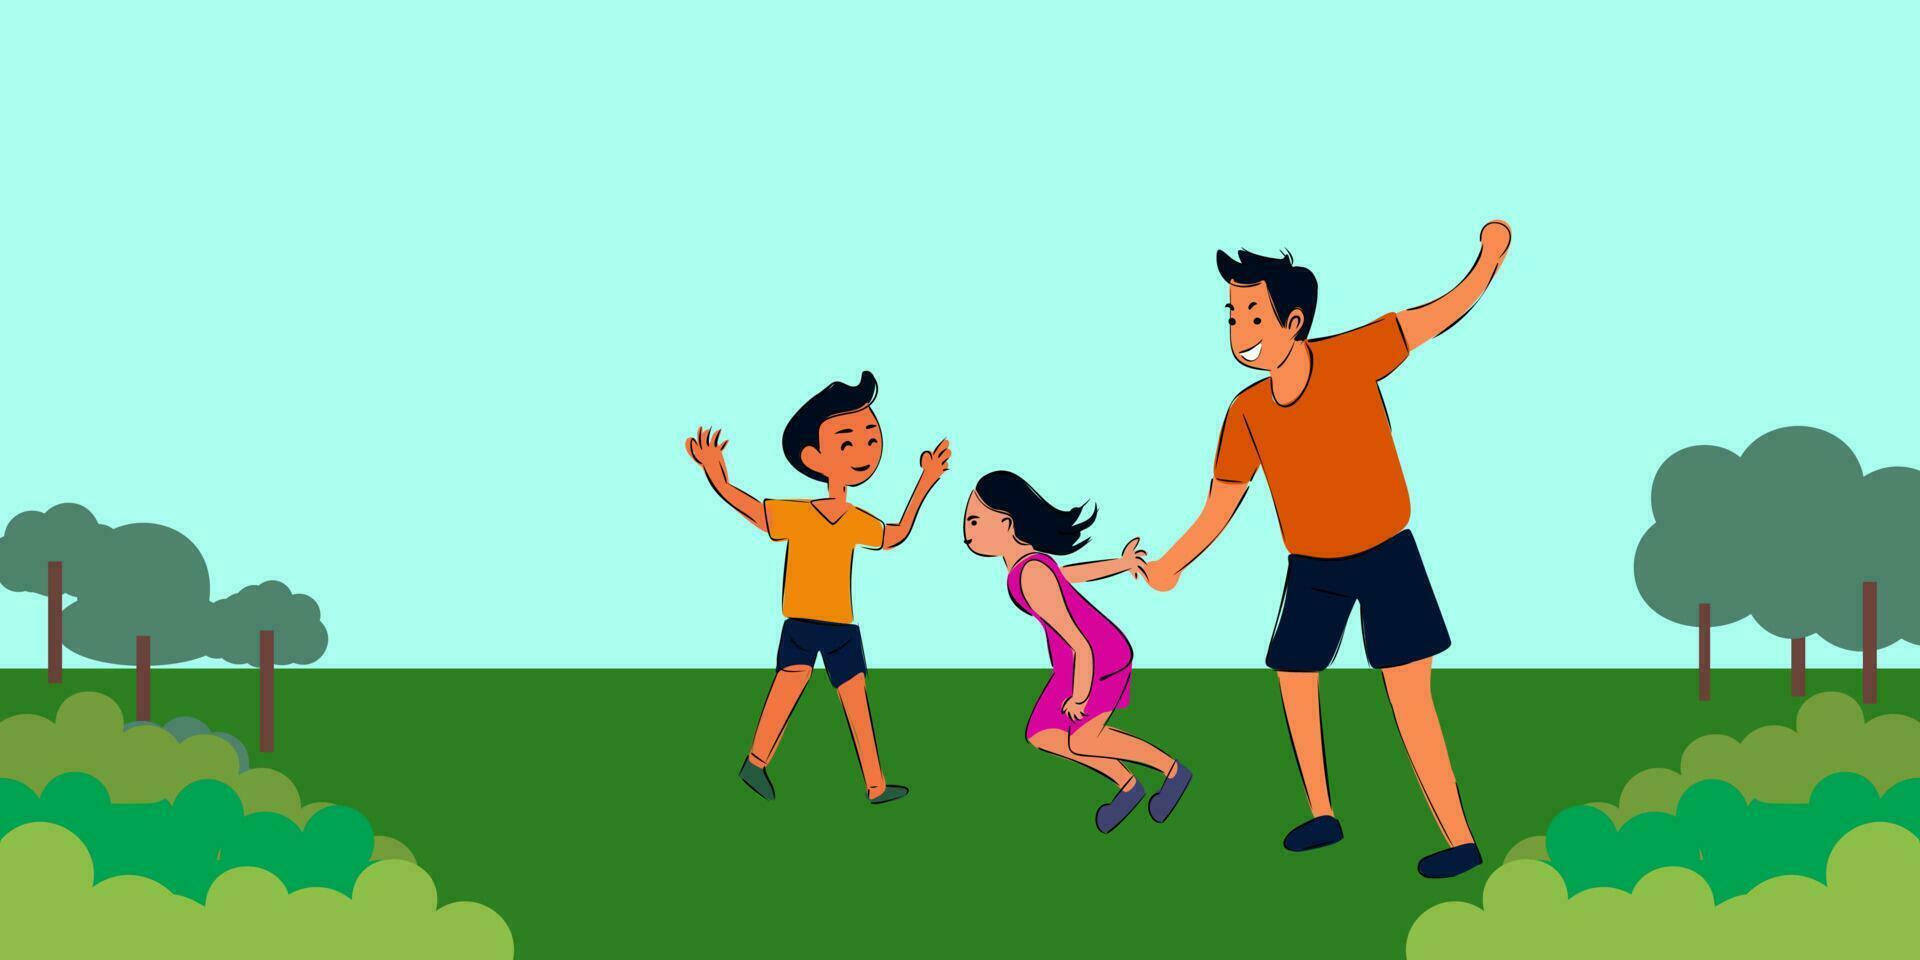 Outdoor joint activity. Happy children and parents playing with toys. Dad walking together with son and daughter in park. Summer leisure vector